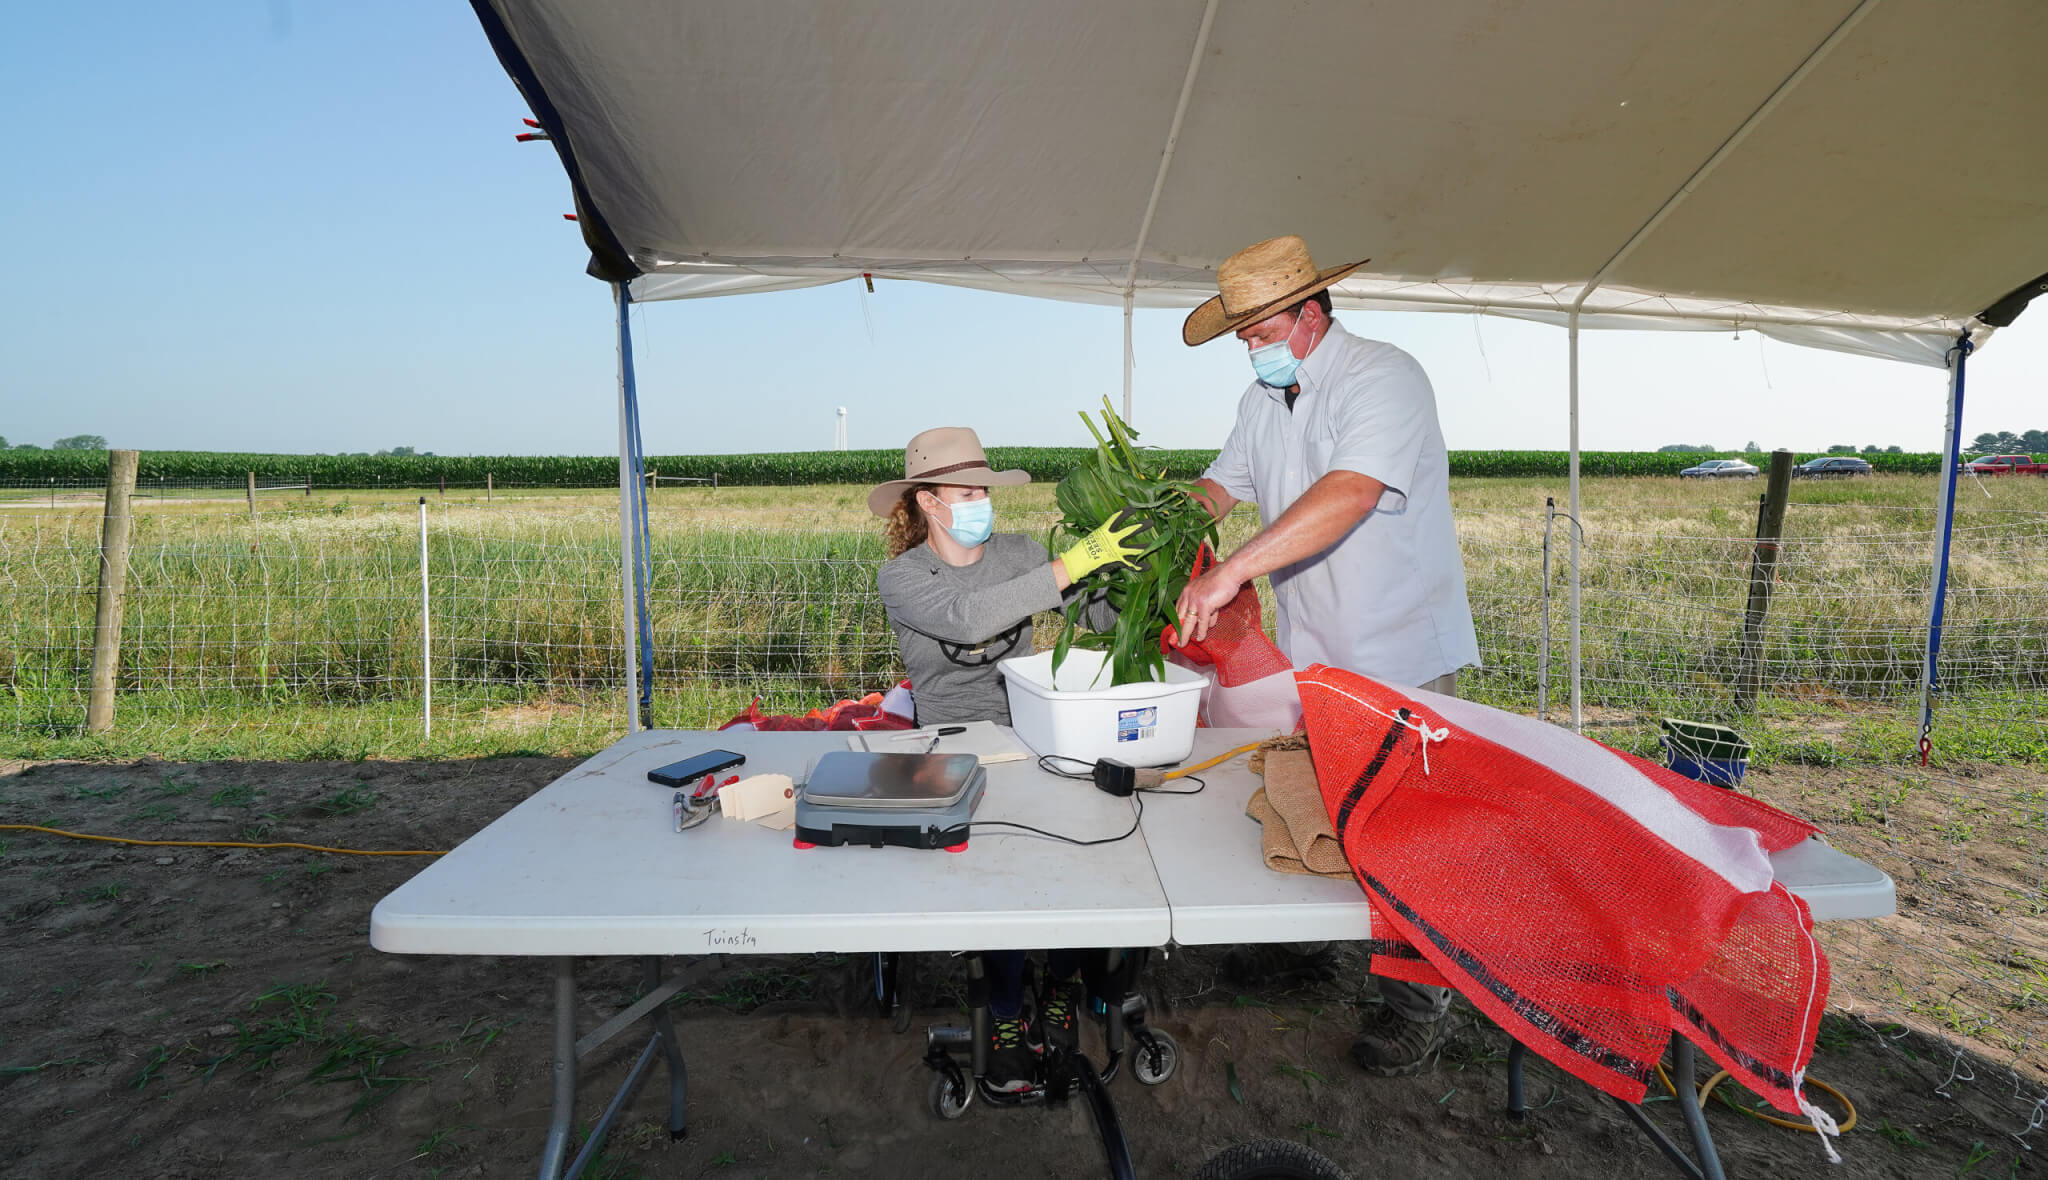  Mitch Tuinstra and assistant working outdoors collecting sorghum plants samples 